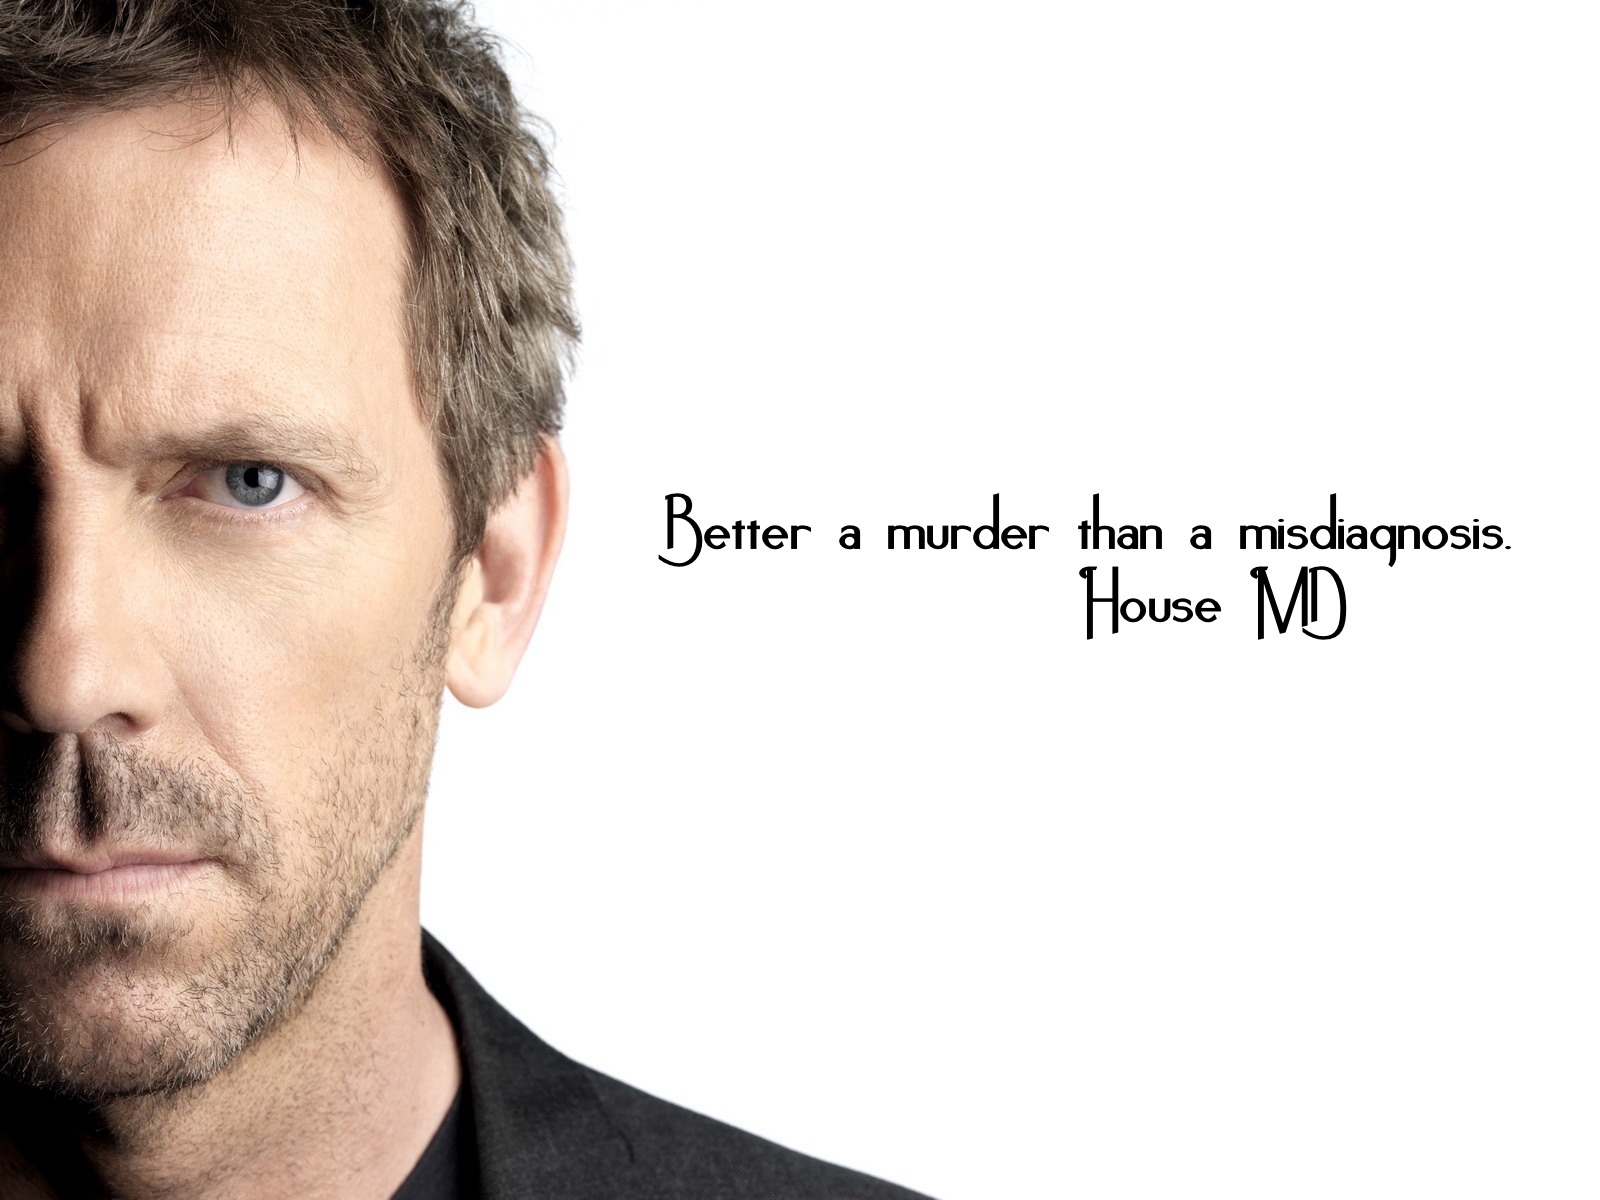 quotes hugh laurie gregory house house md 1600x1200 wallpaper High Quality Wallpaper, High Definition Wallpaper